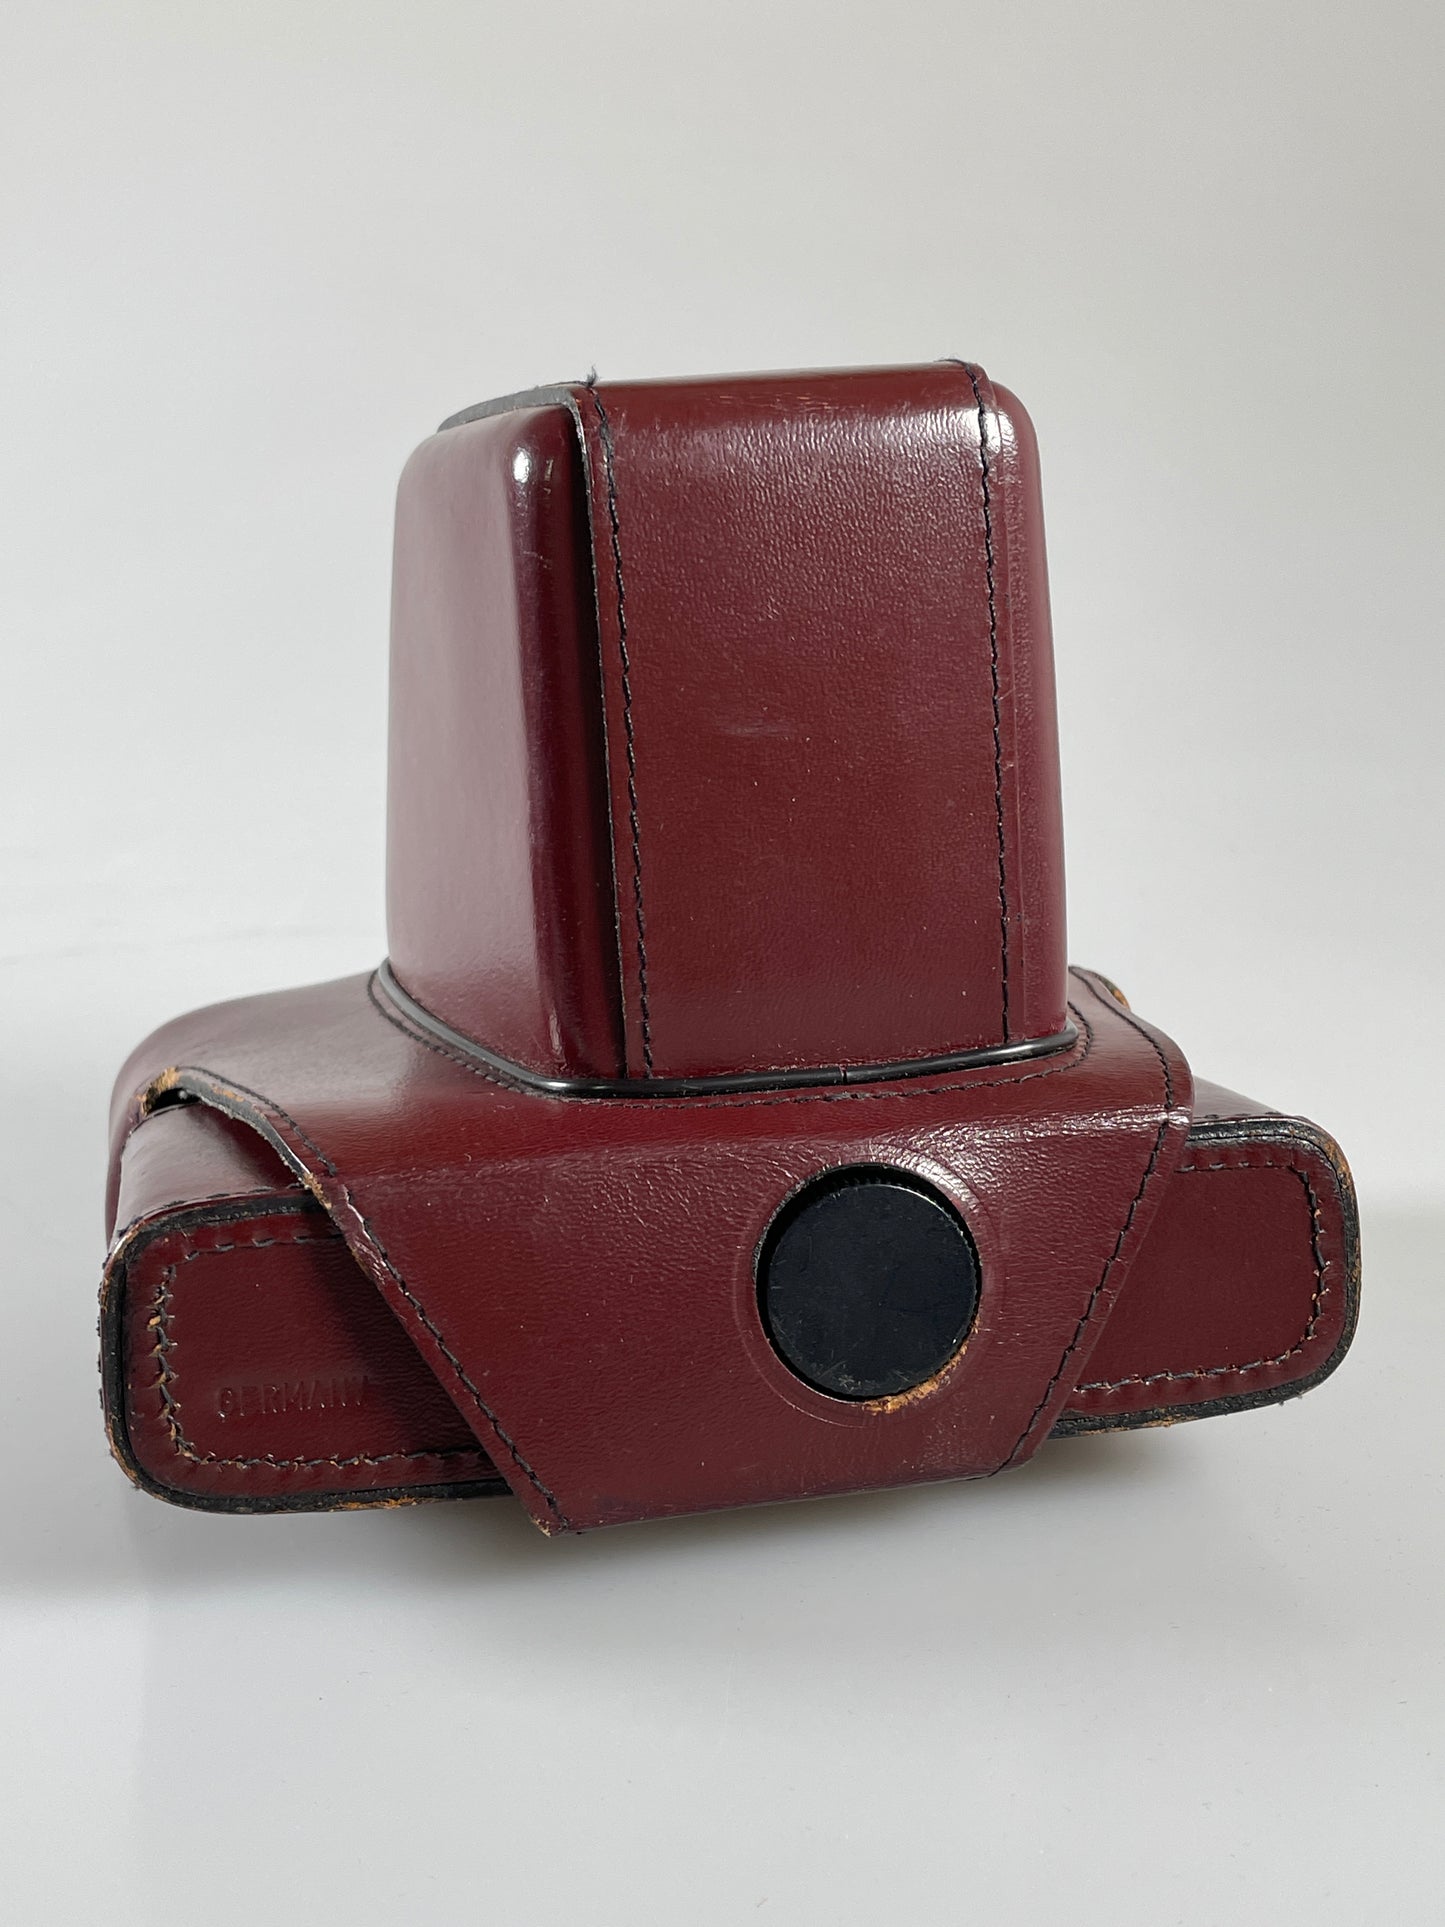 LEICA EVER-READY MAROON LEATHER CASE FOR LEICA R3